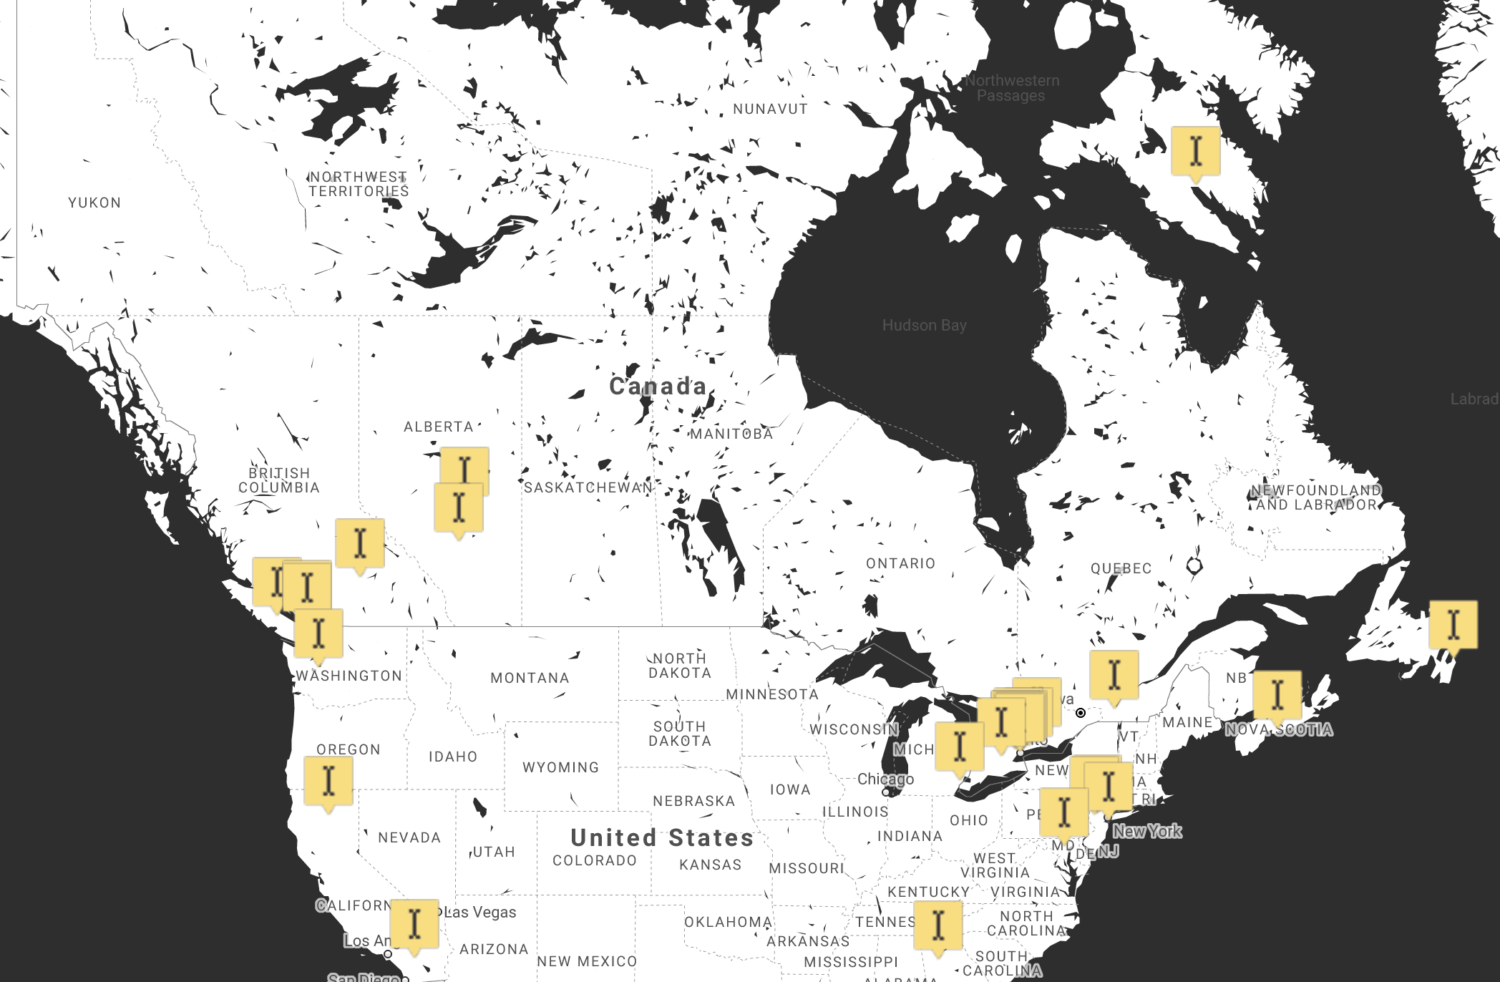 Black and white map of Canada and the United States with 37 yellow markers showing the location of Indiegraf publishers.